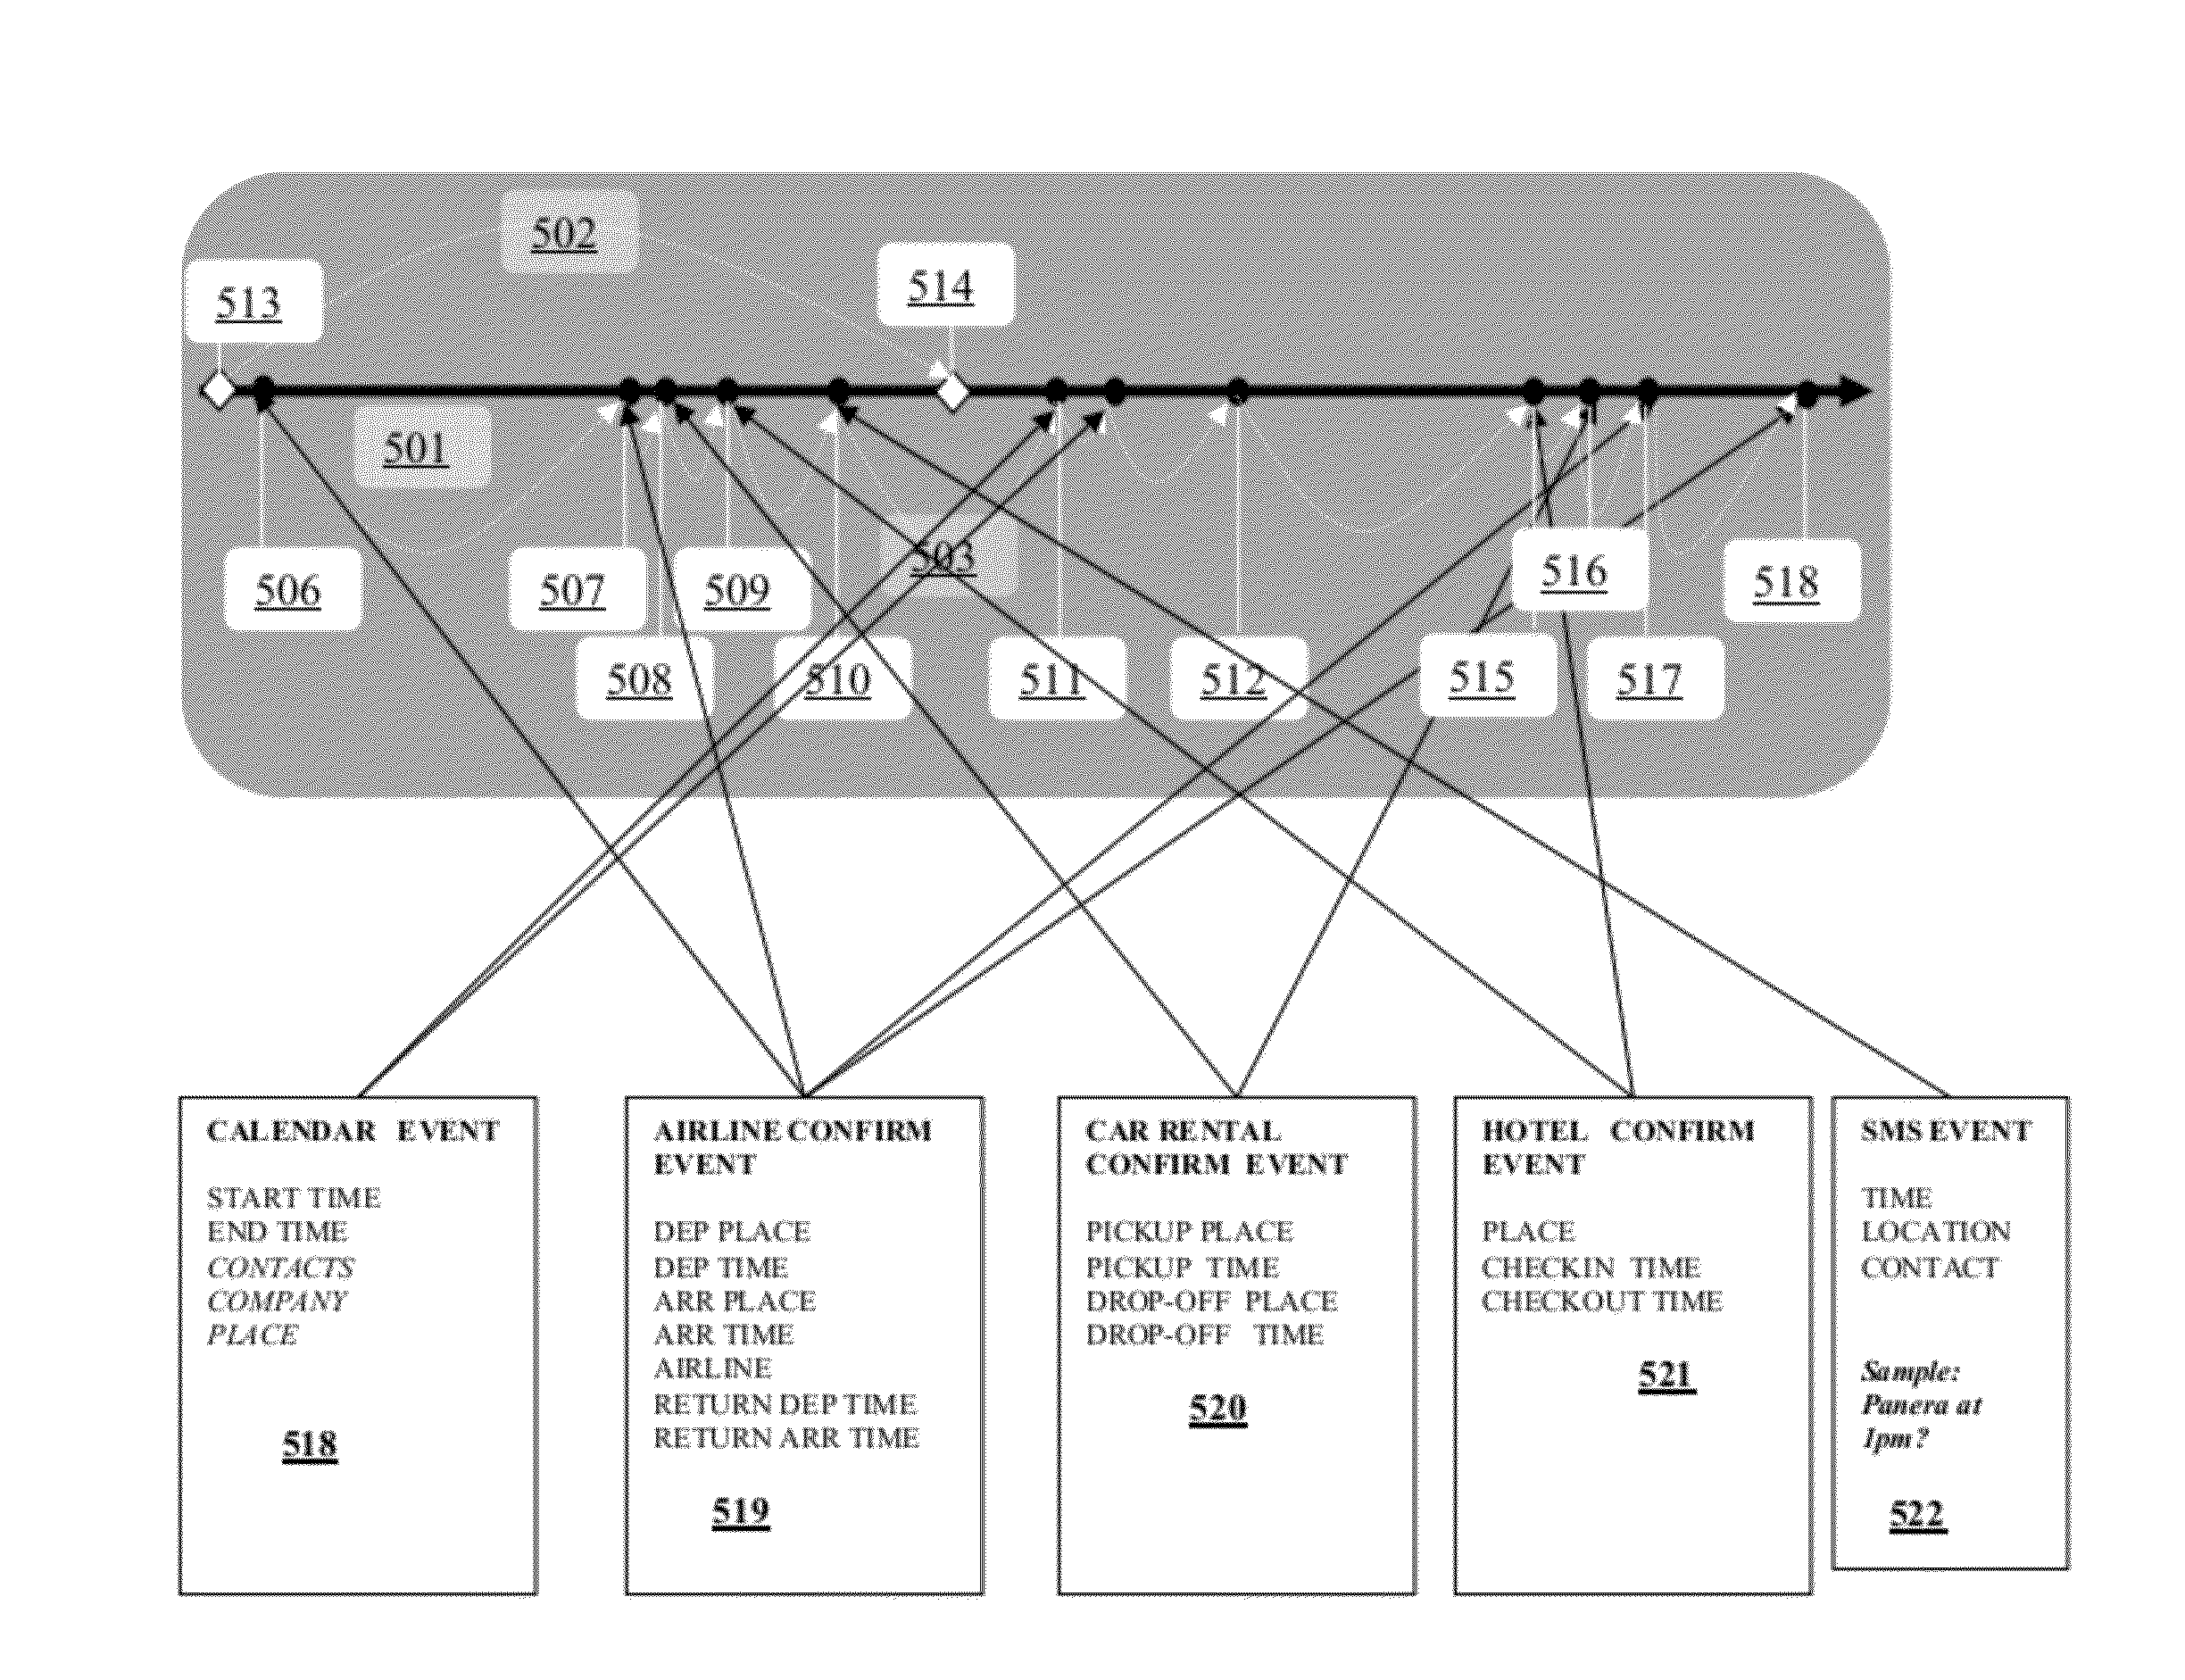 System and method for an intelligent personal timeline assistant